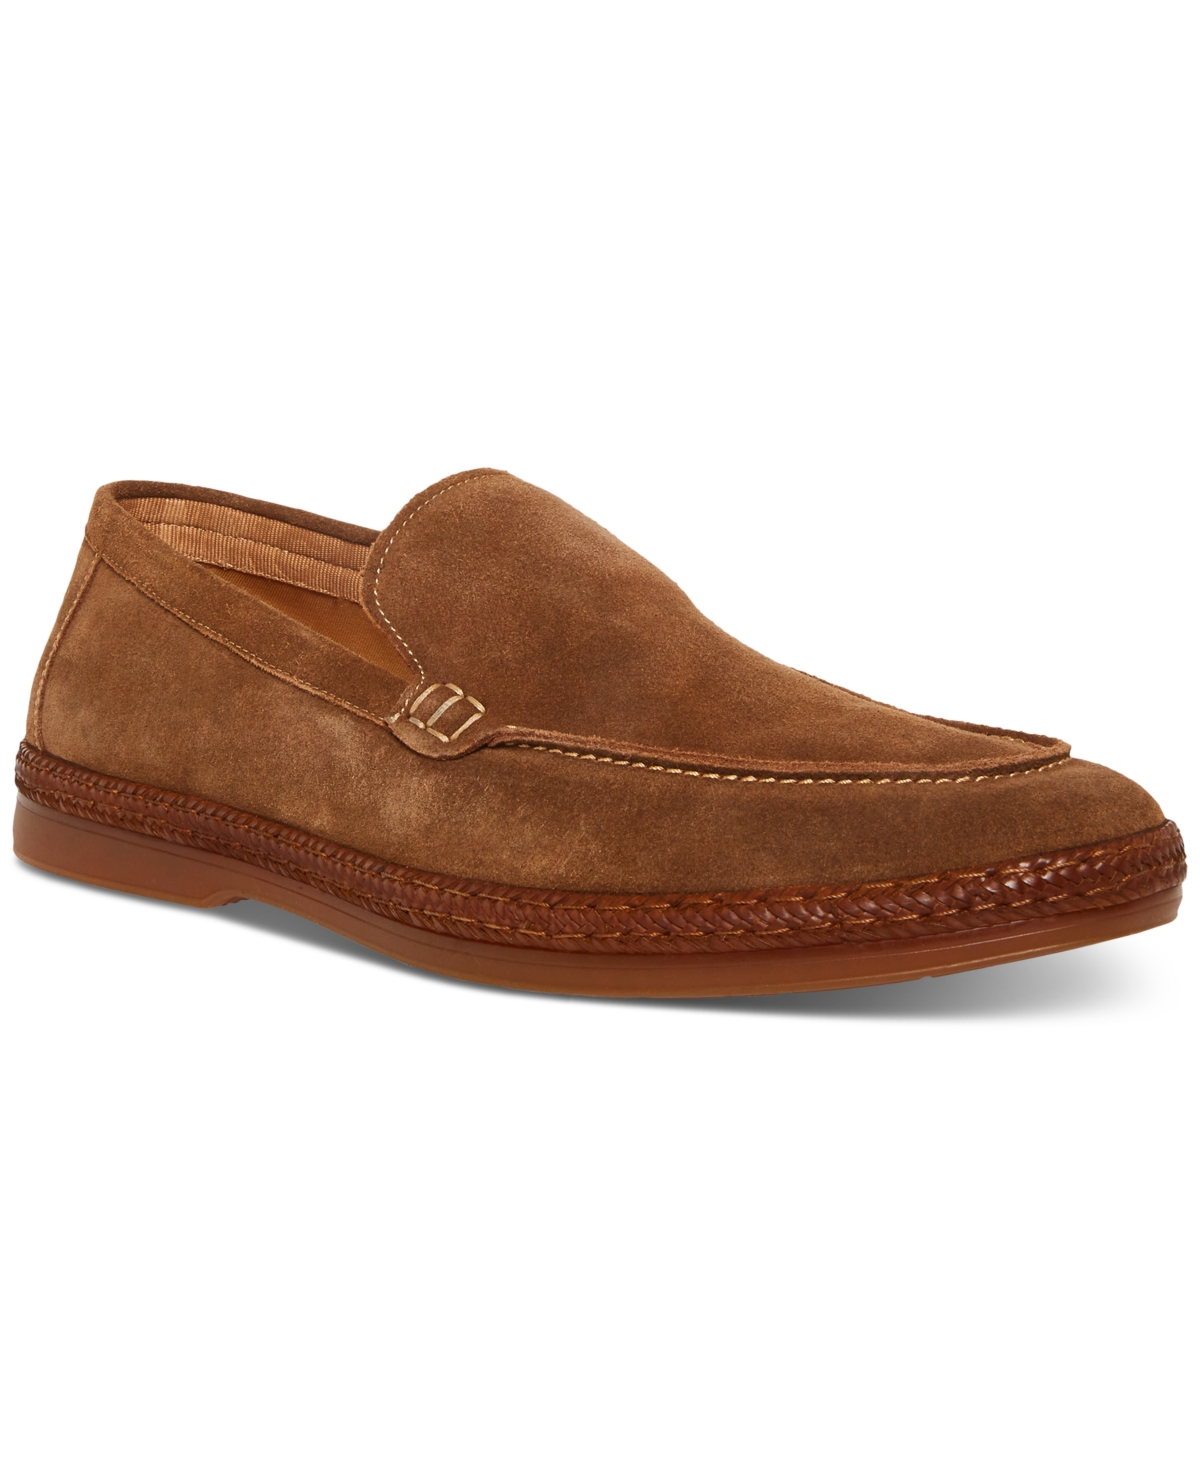 Men's Mateo Suede Dress Casual Loafer - Tobacco